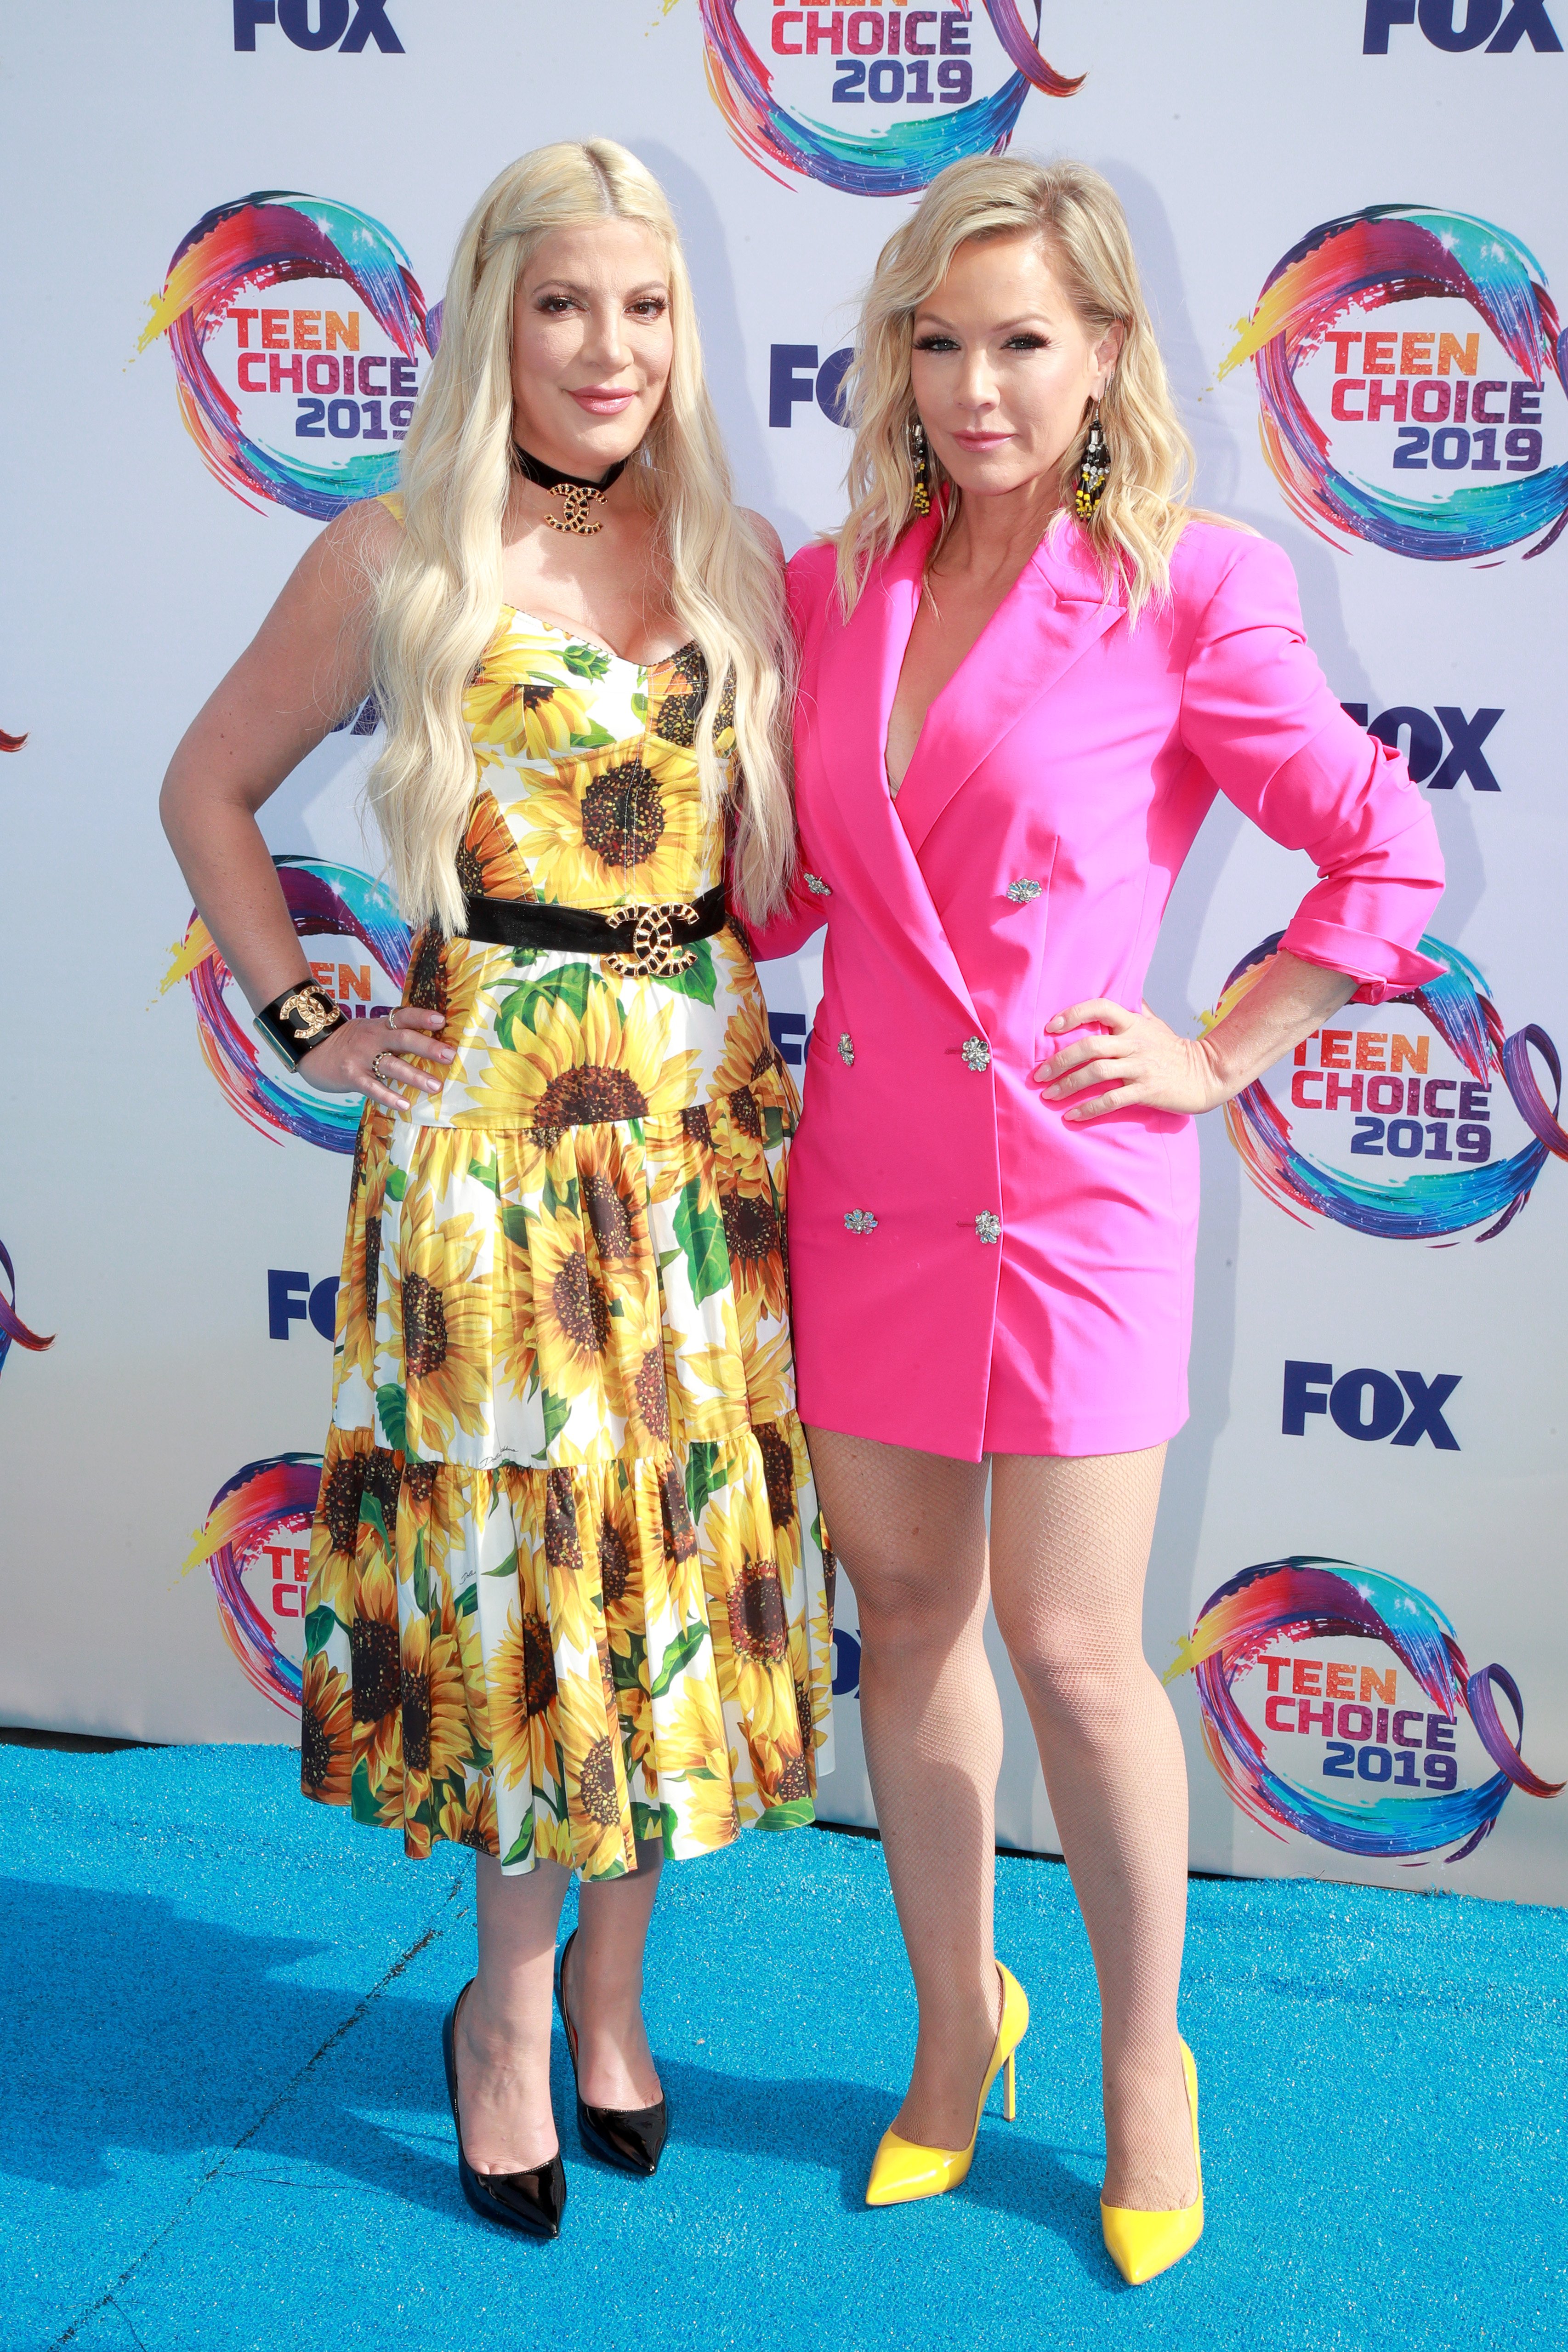 Tori Spelling and Jennie Garth attend FOX's Teen Choice Awards 2019 on August 11, 2019, in Hermosa Beach, California. | Source: Getty Images.